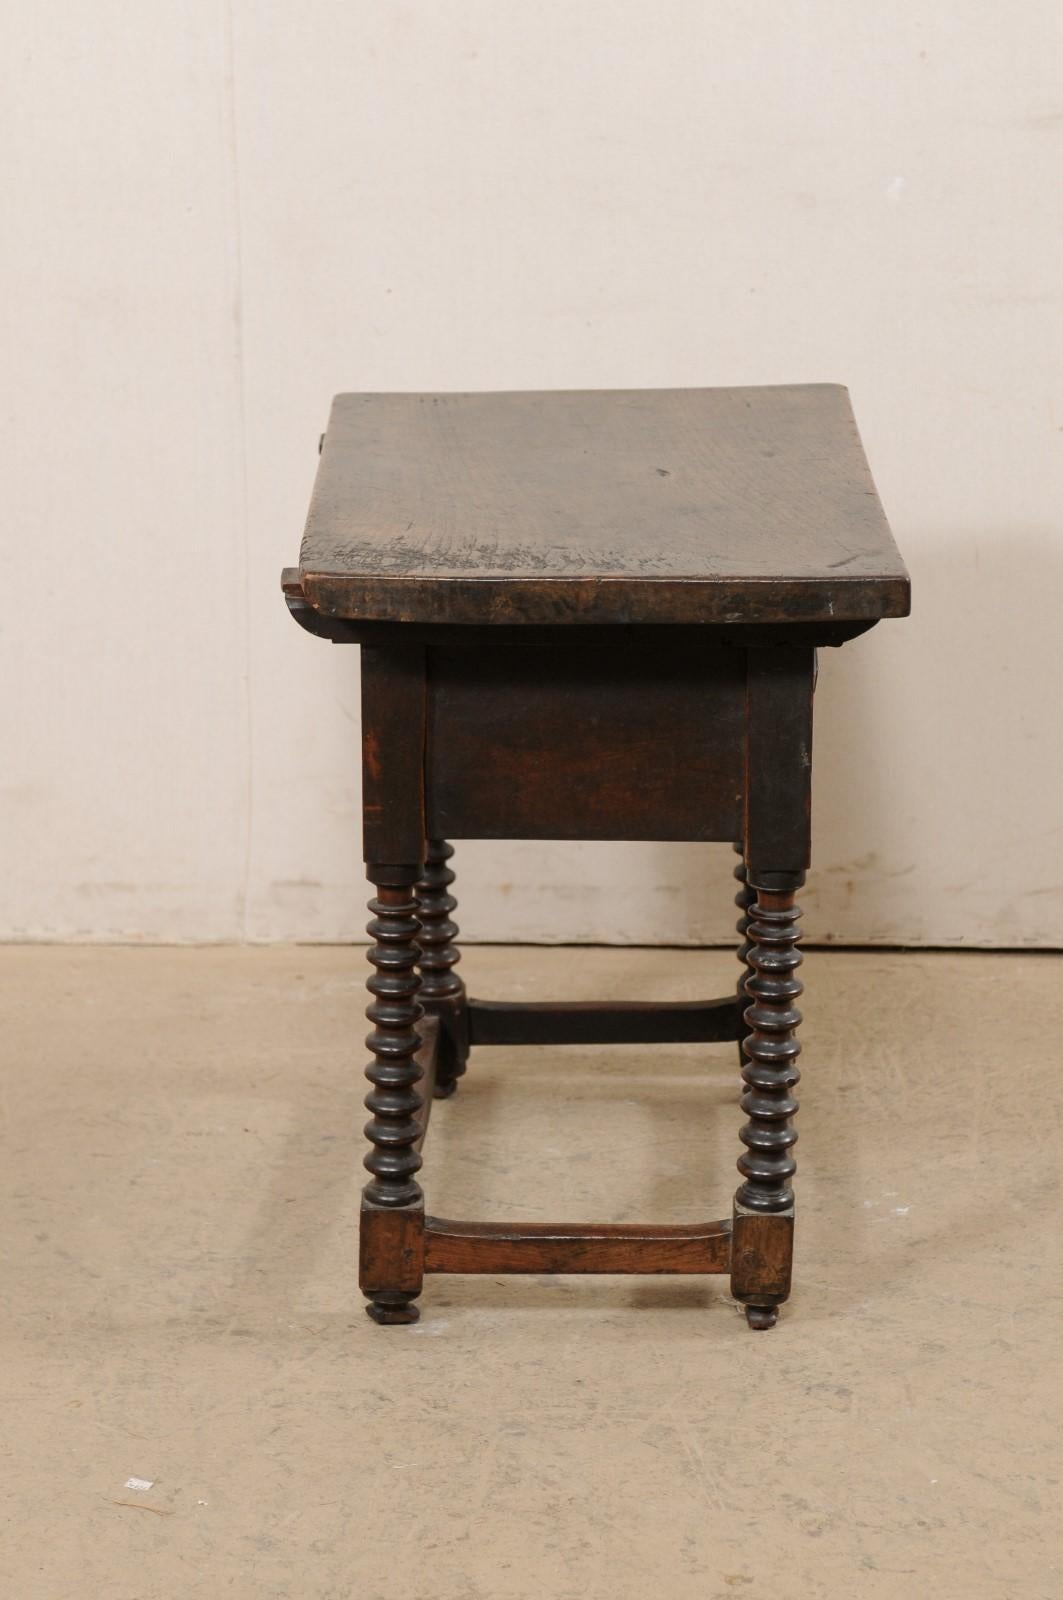 Wood 18th Century Carved-Walnut Occasional Table with Single Drawer from Italy